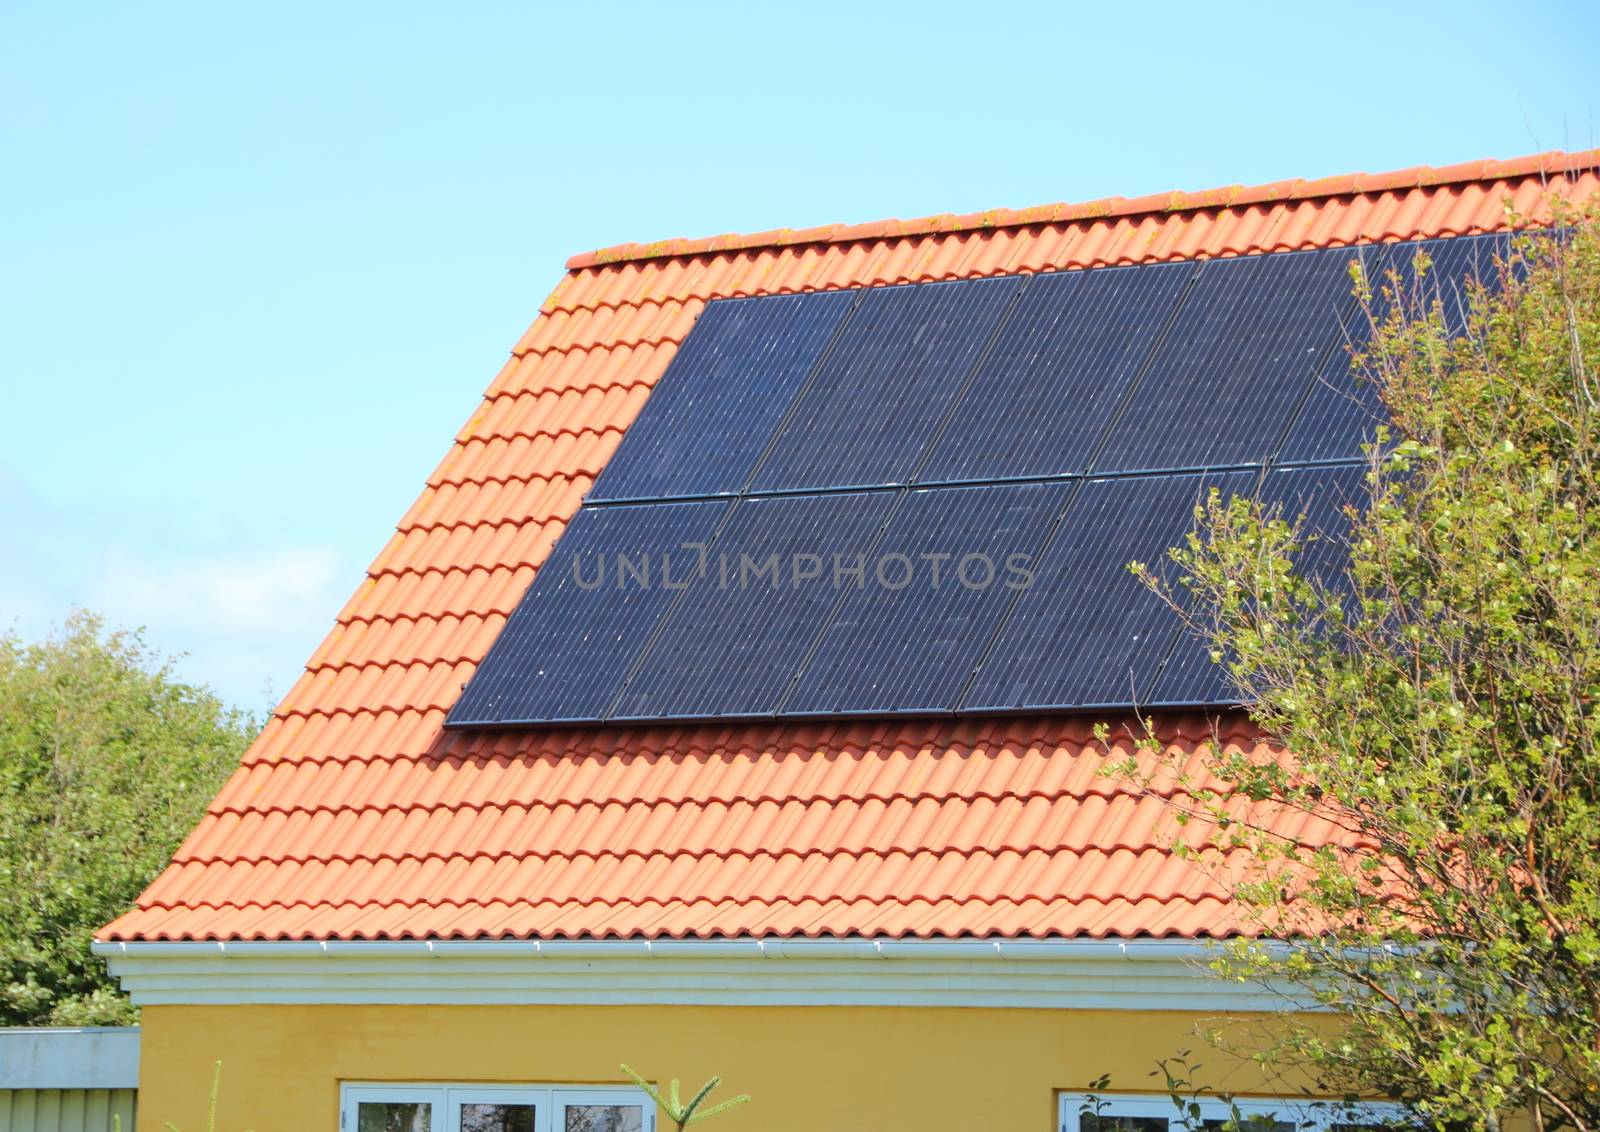 Solar panel on House Roof with Red Tiles Saving Electricity